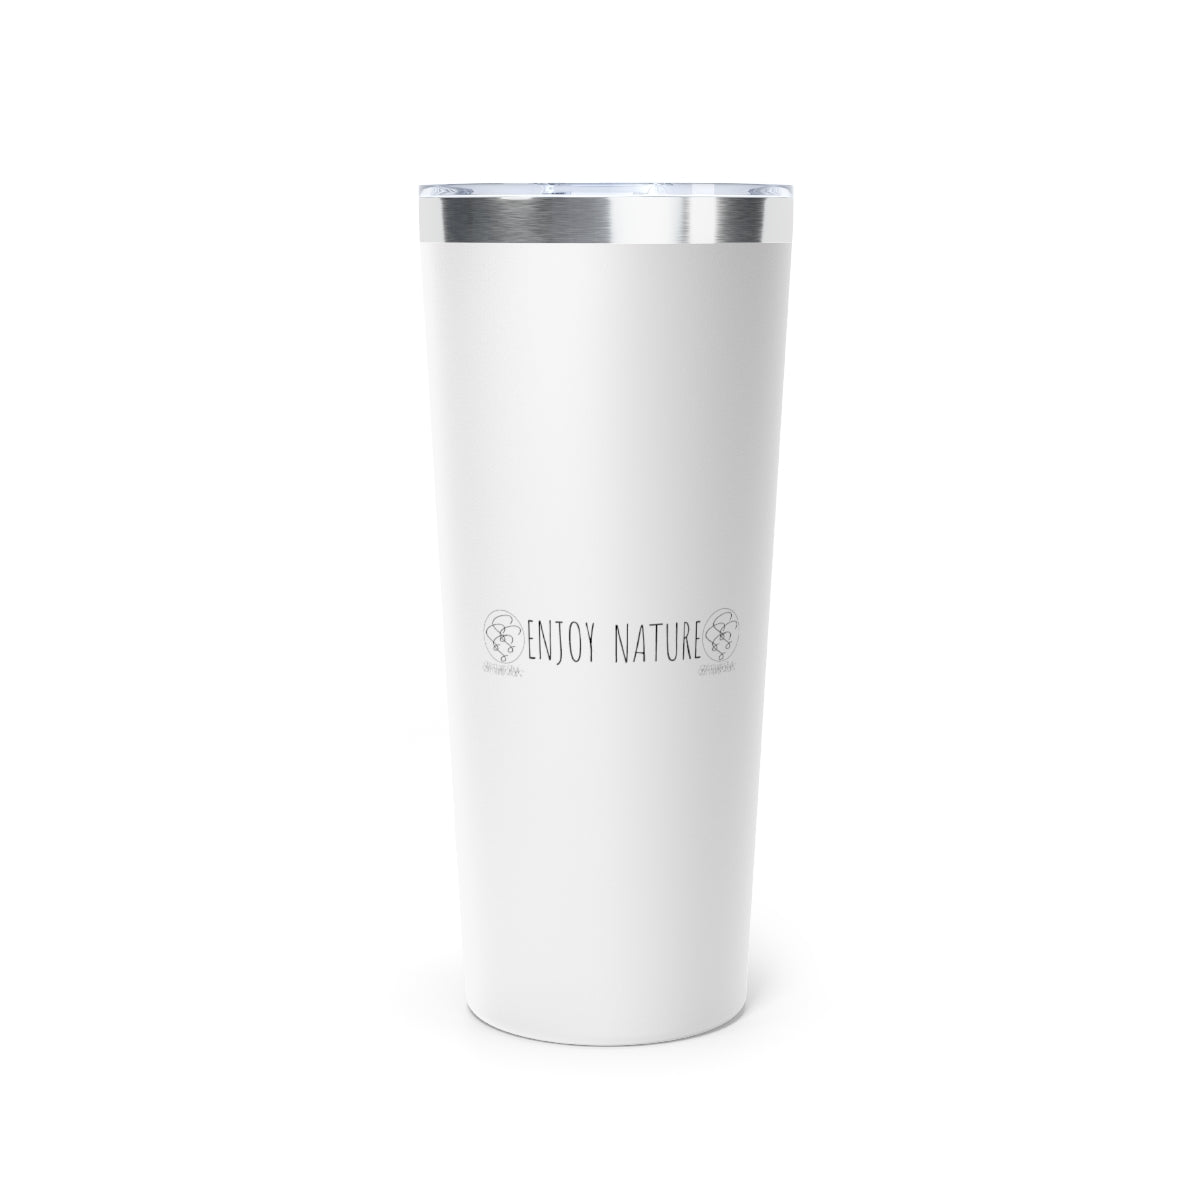 SSSS Soothing Copper Vacuum Insulated Tumbler, 22oz